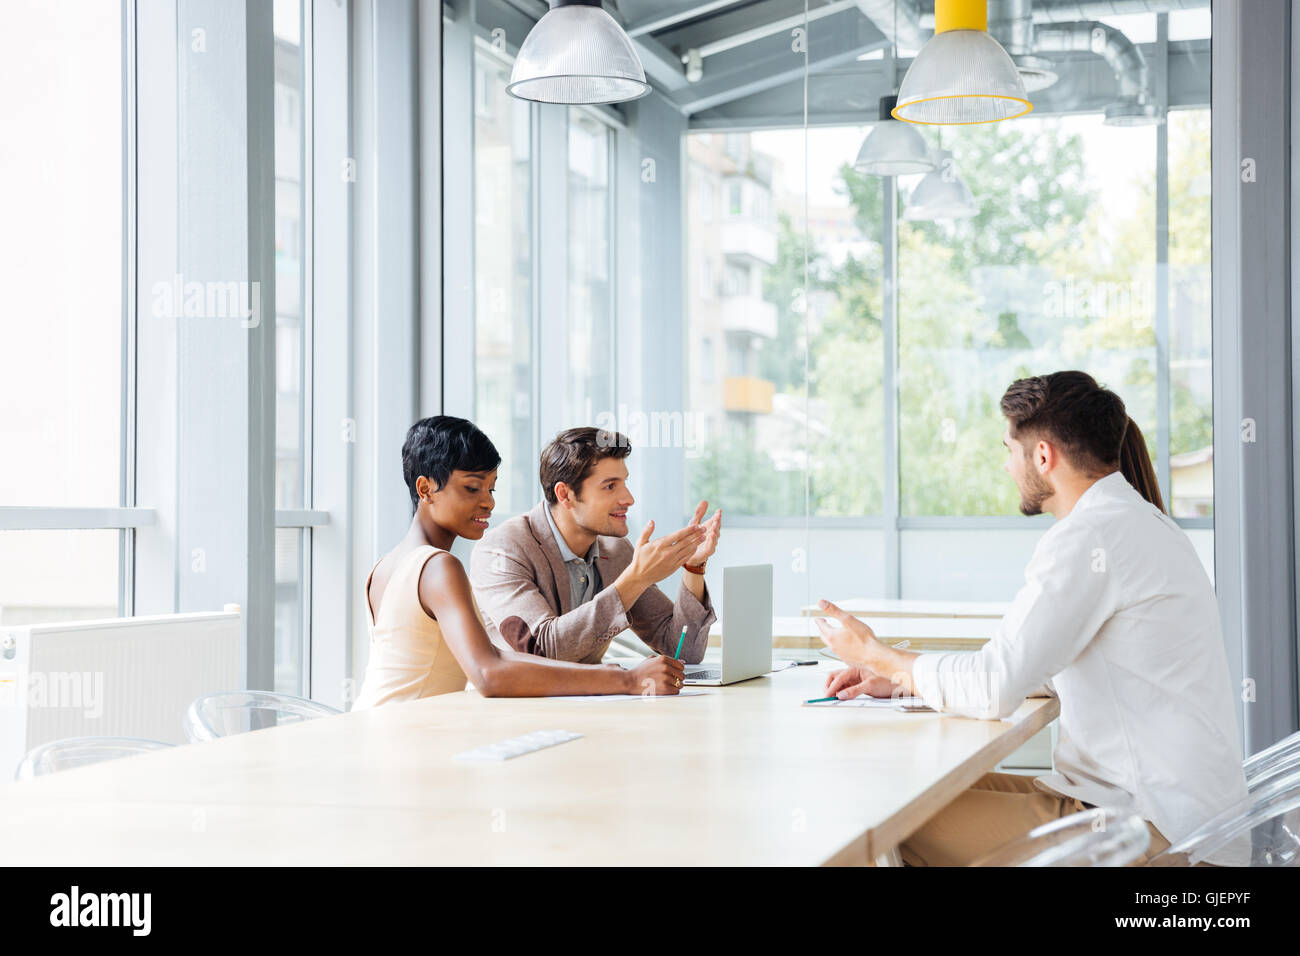 Group of young businesspeople working in office and discussing new ideas Stock Photo